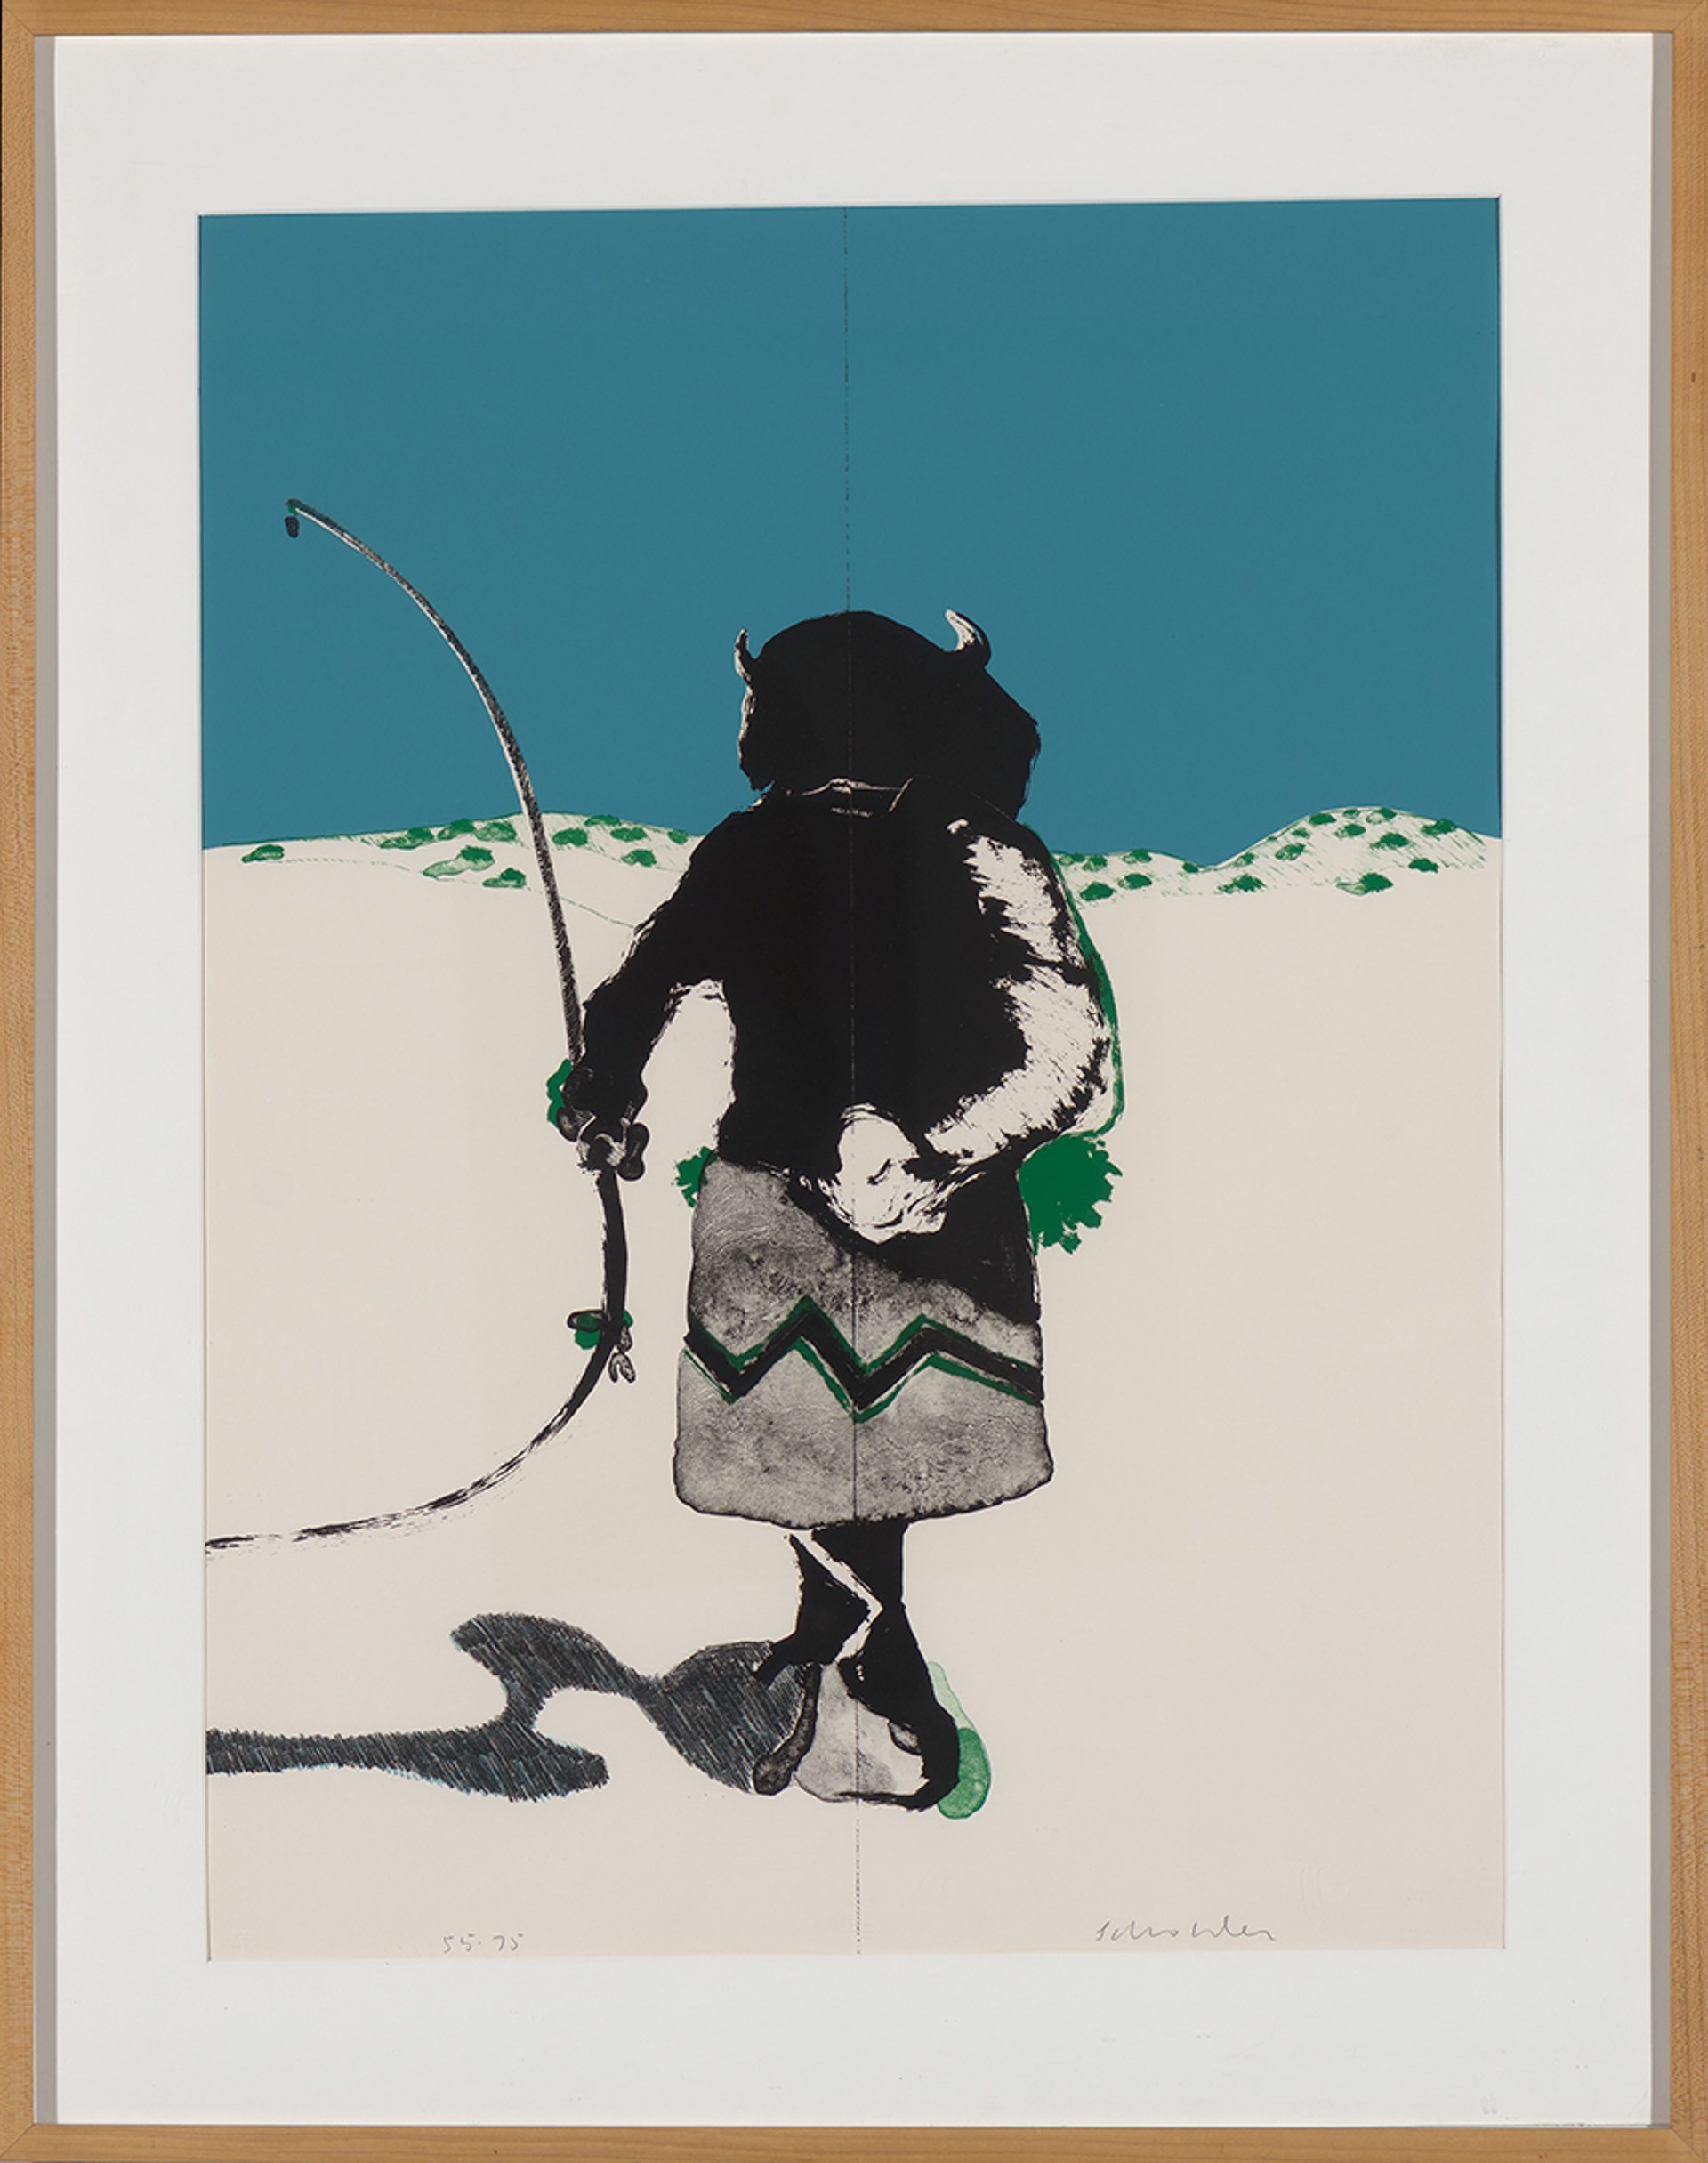 Buffalo Dancer: New Mexico (State I), Ed. 55/75 by Fritz Scholder